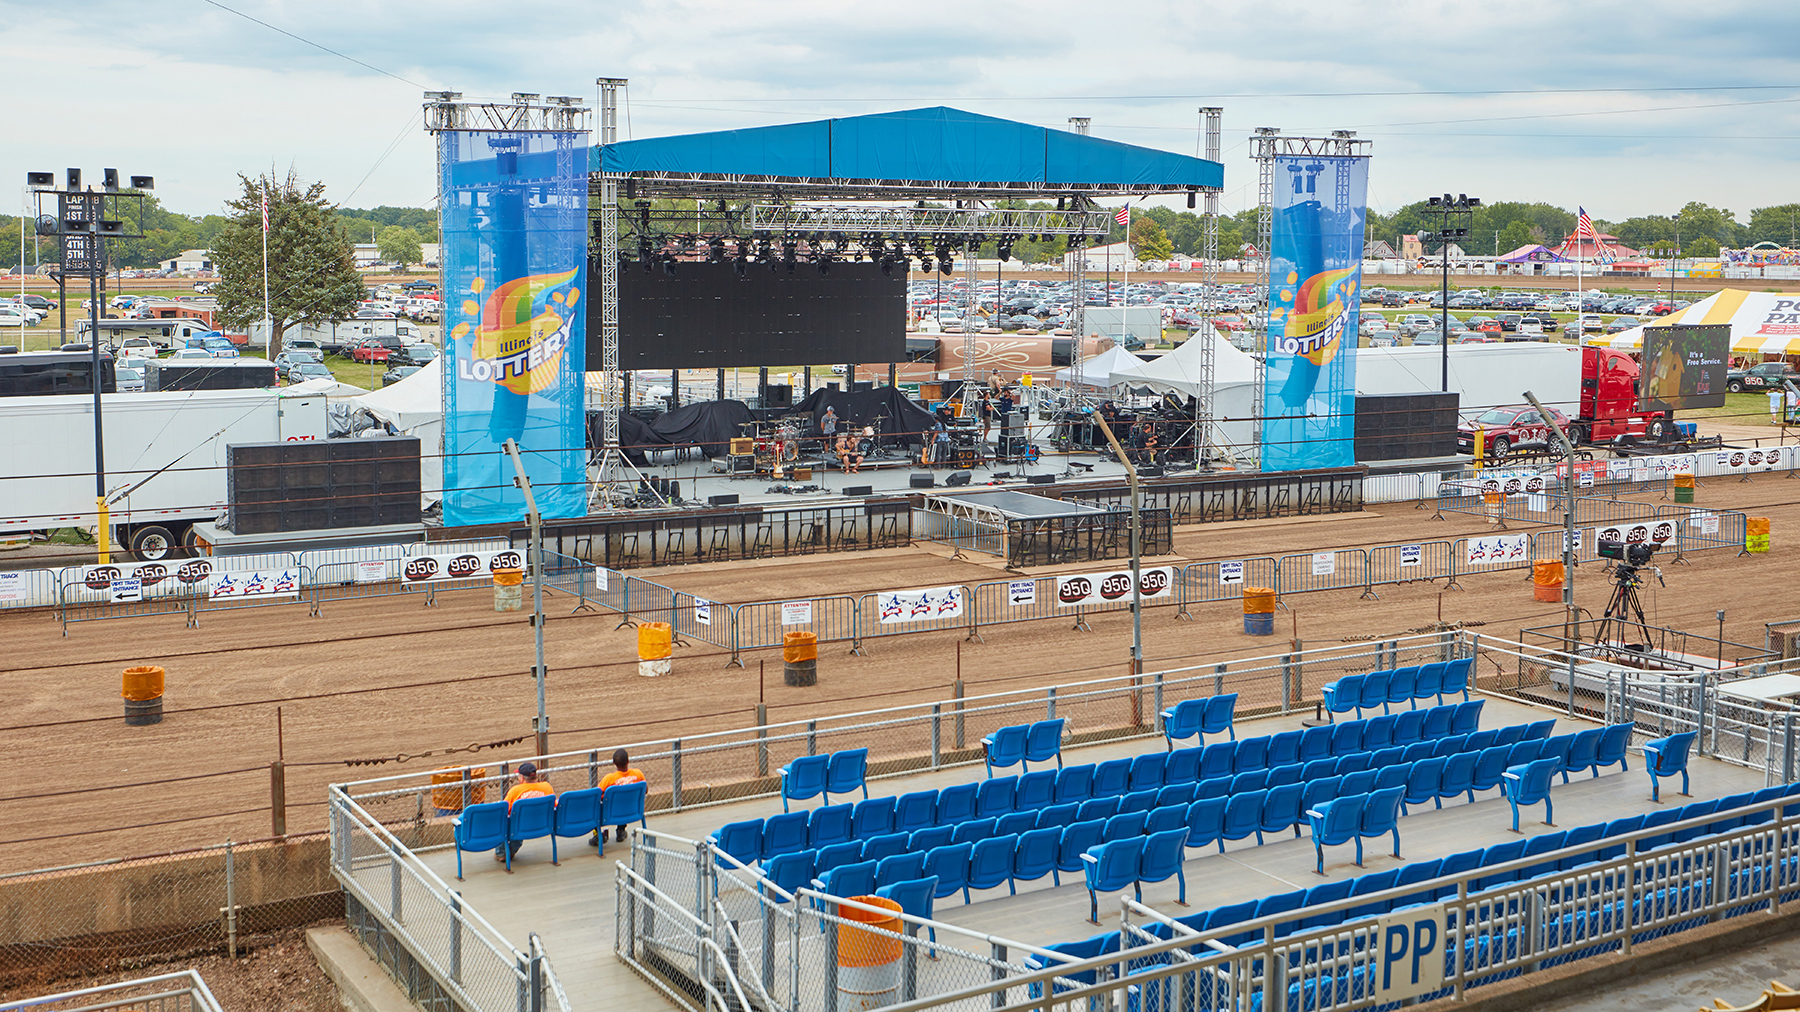 Mason Sound adds Dynacord Sonicue to the Mix at Illinois State Fair ...